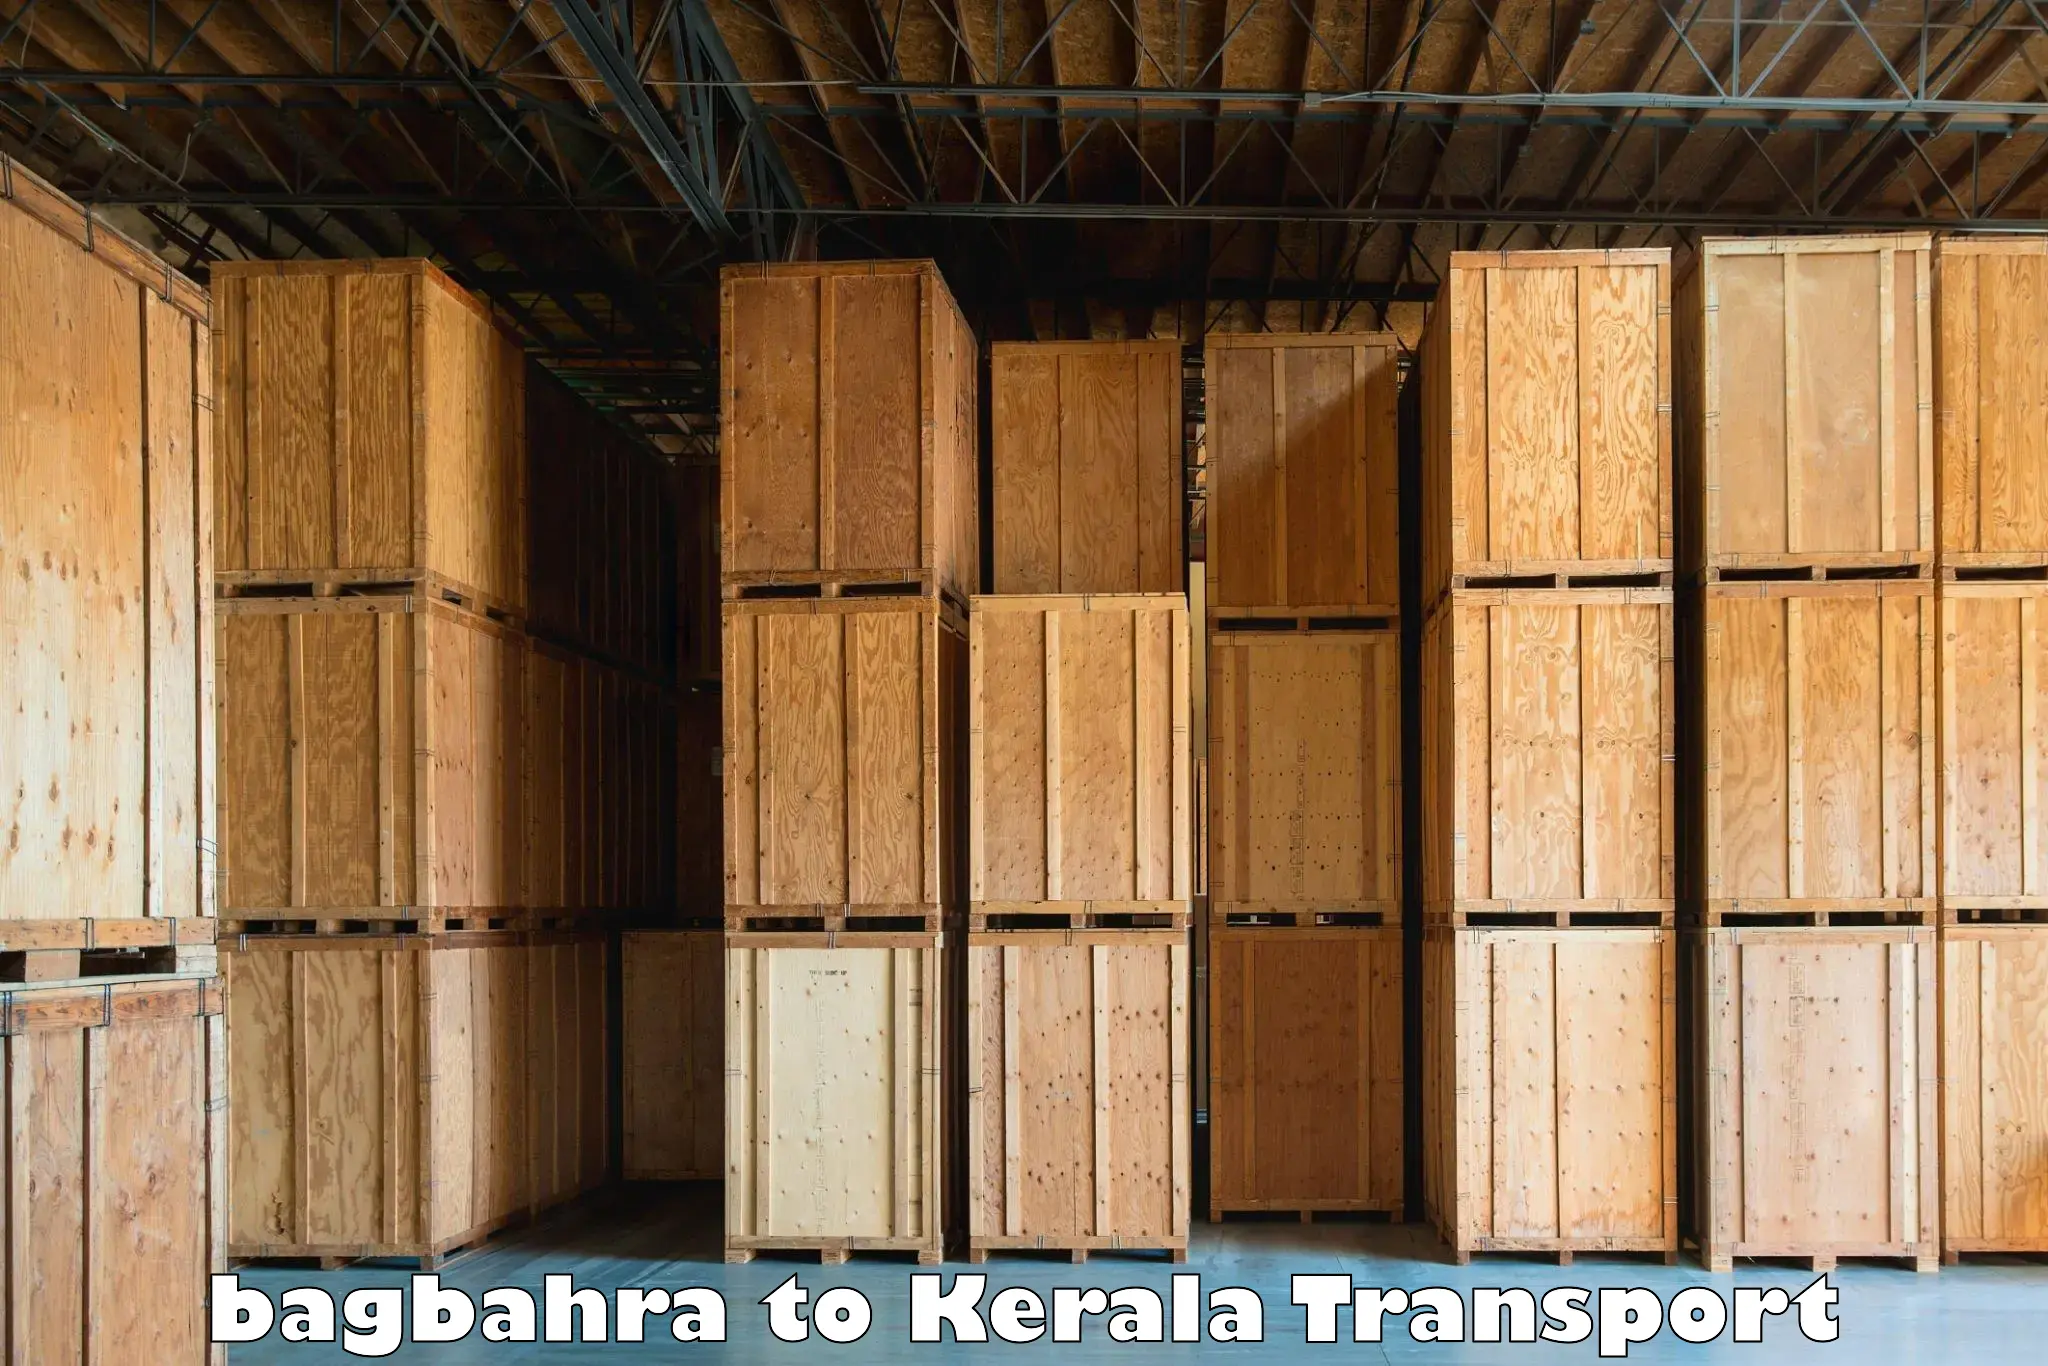 Container transport service bagbahra to Mahe